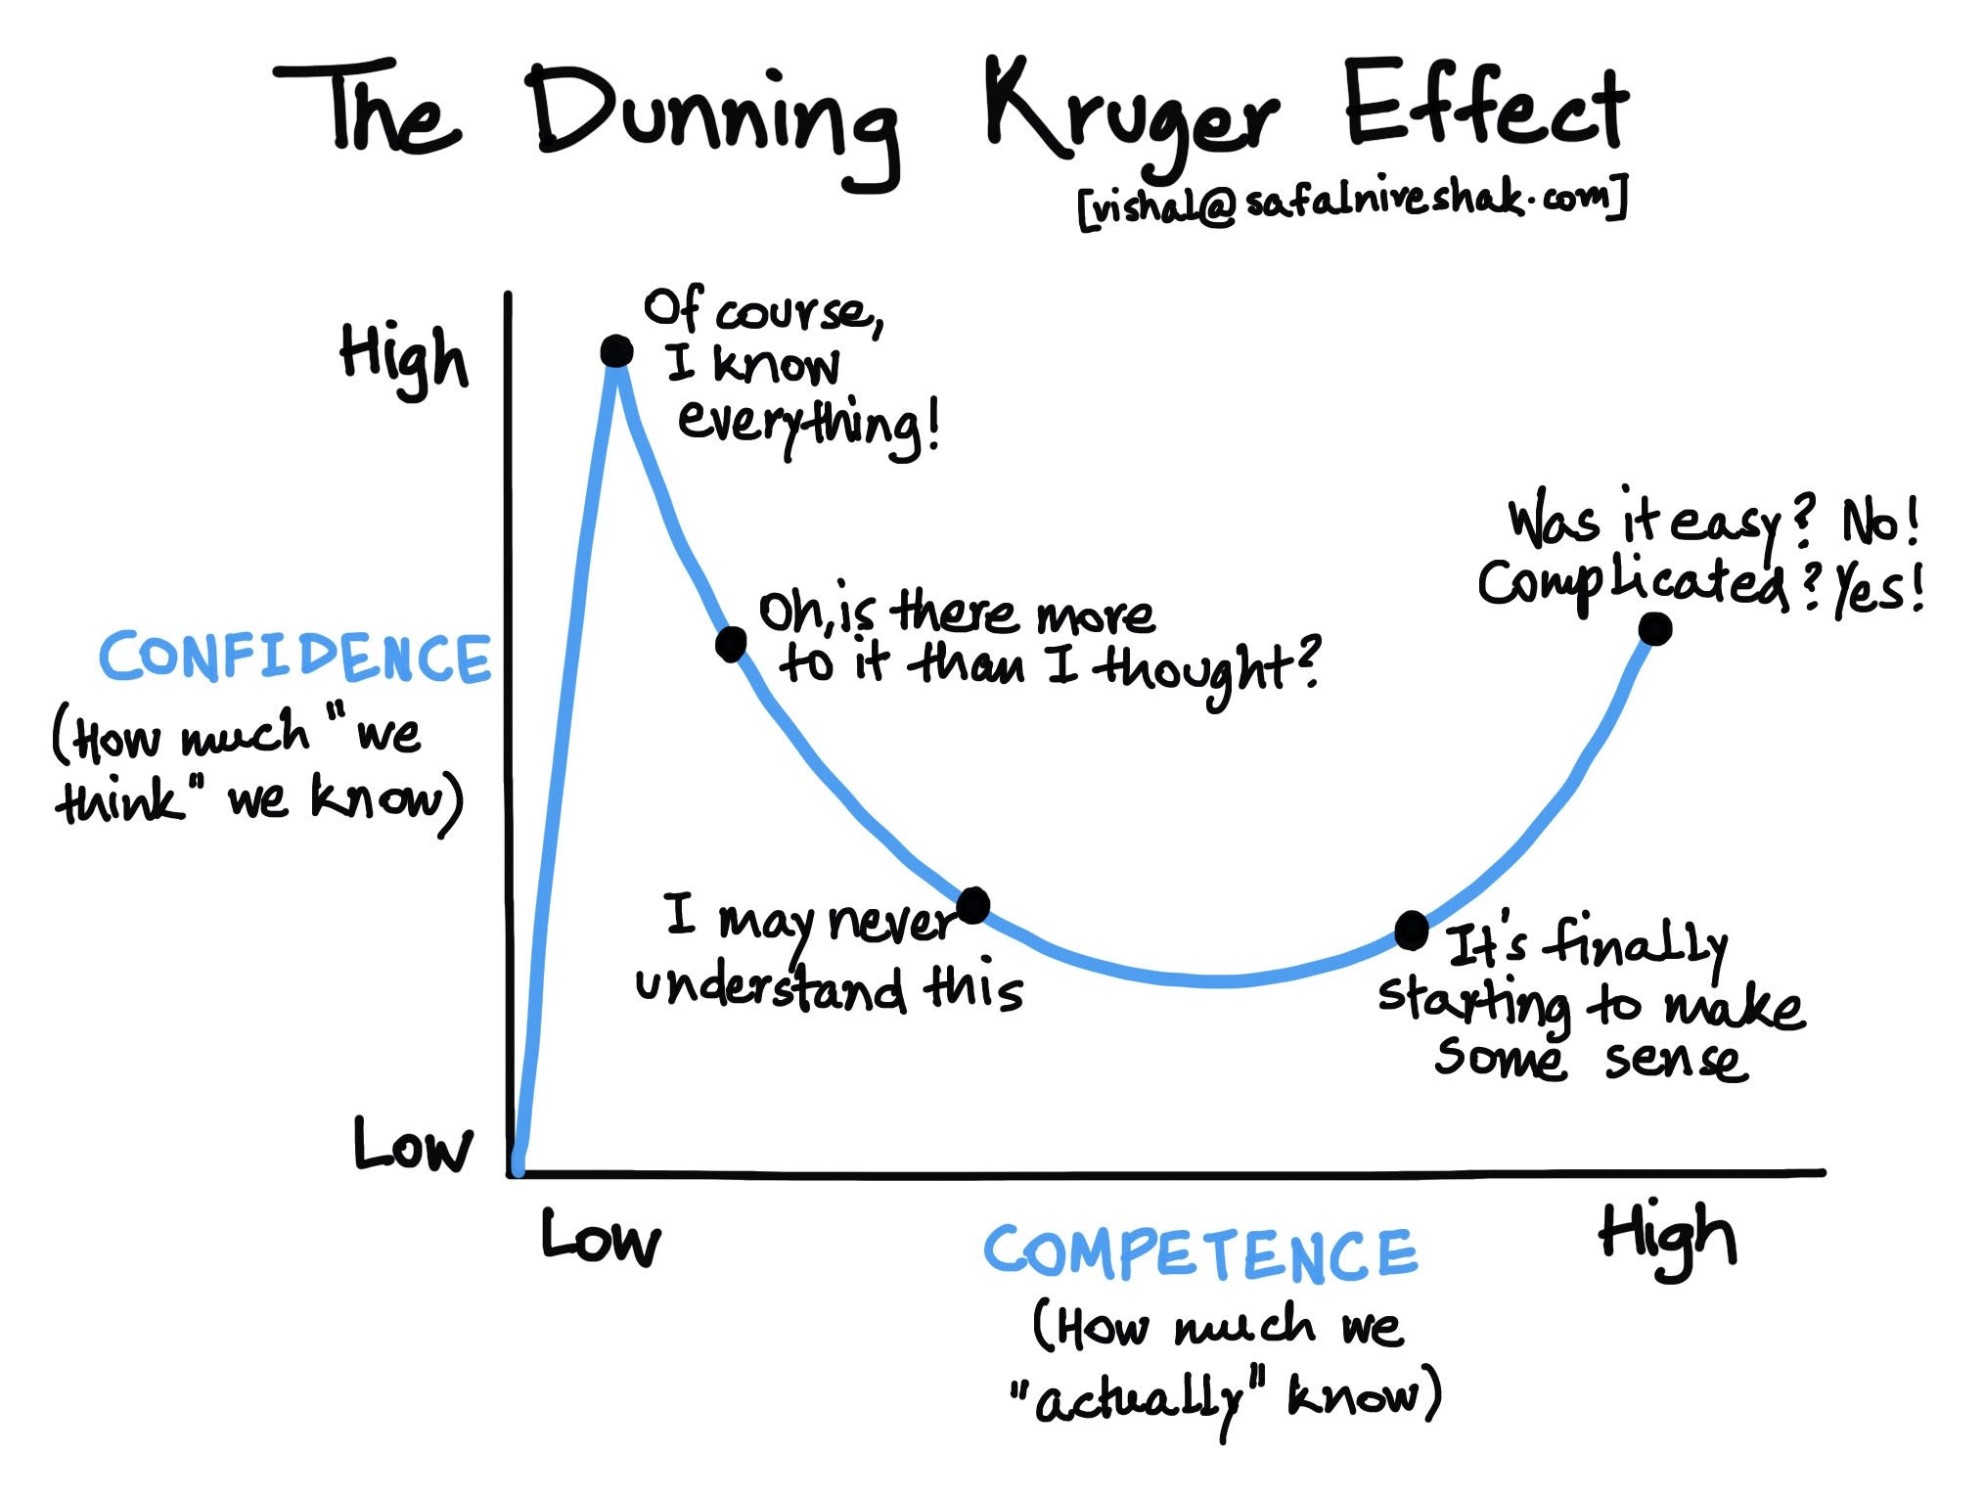 A graph of the Dunning Kruger Effect hand drawn by vishal@safalniveshak.com - for decent ALT text please see this post on twitter: https://twitter.com/sarajwallen/status/1549349621574651905